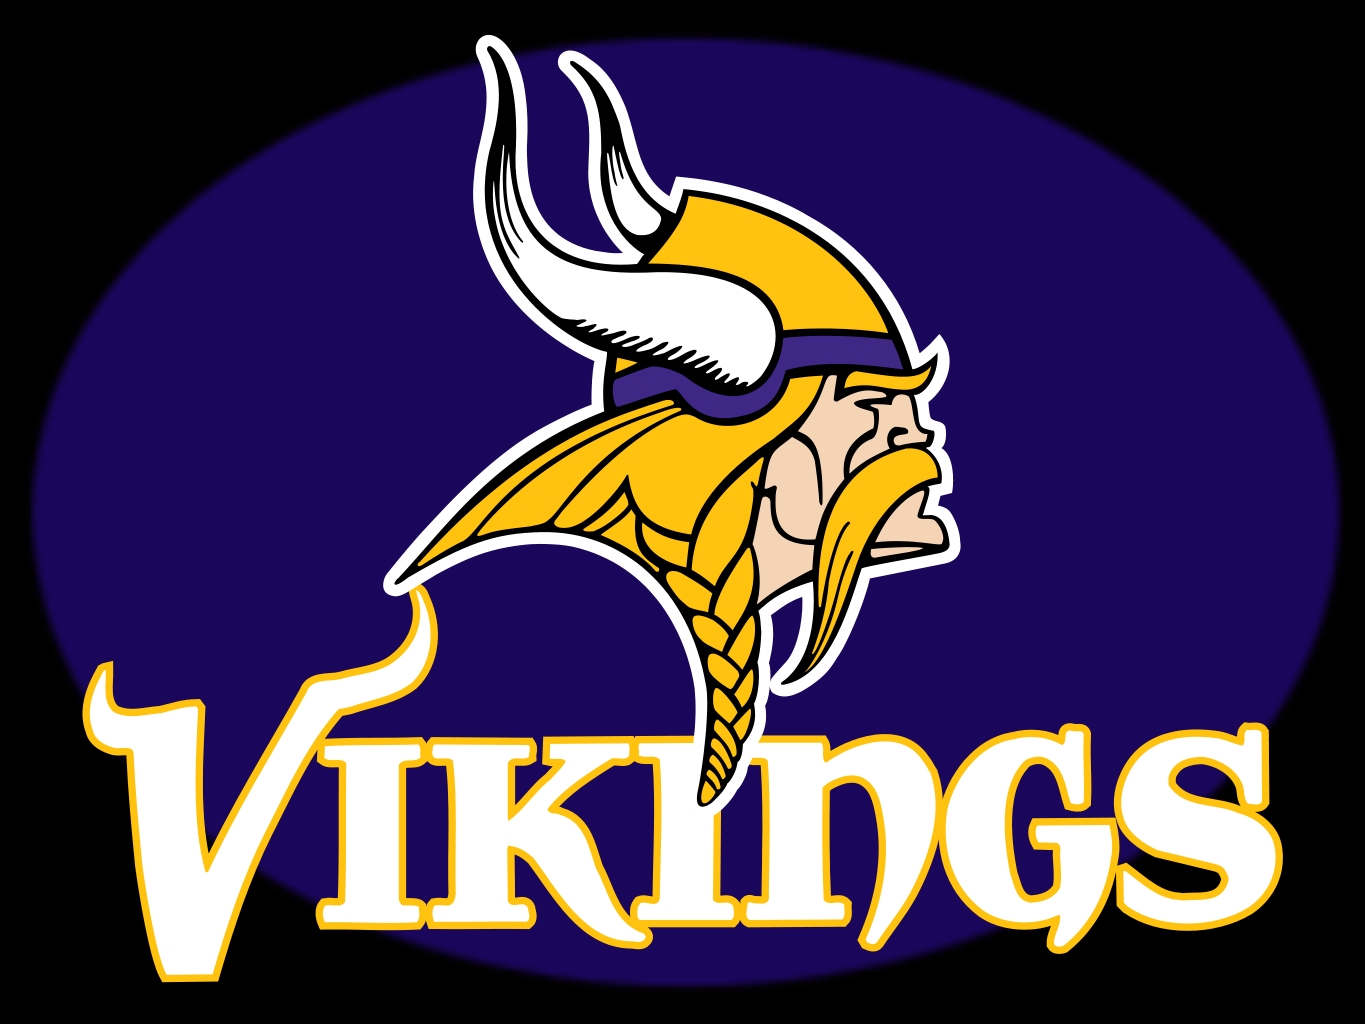 Minnesota Vikings Image And Quotes